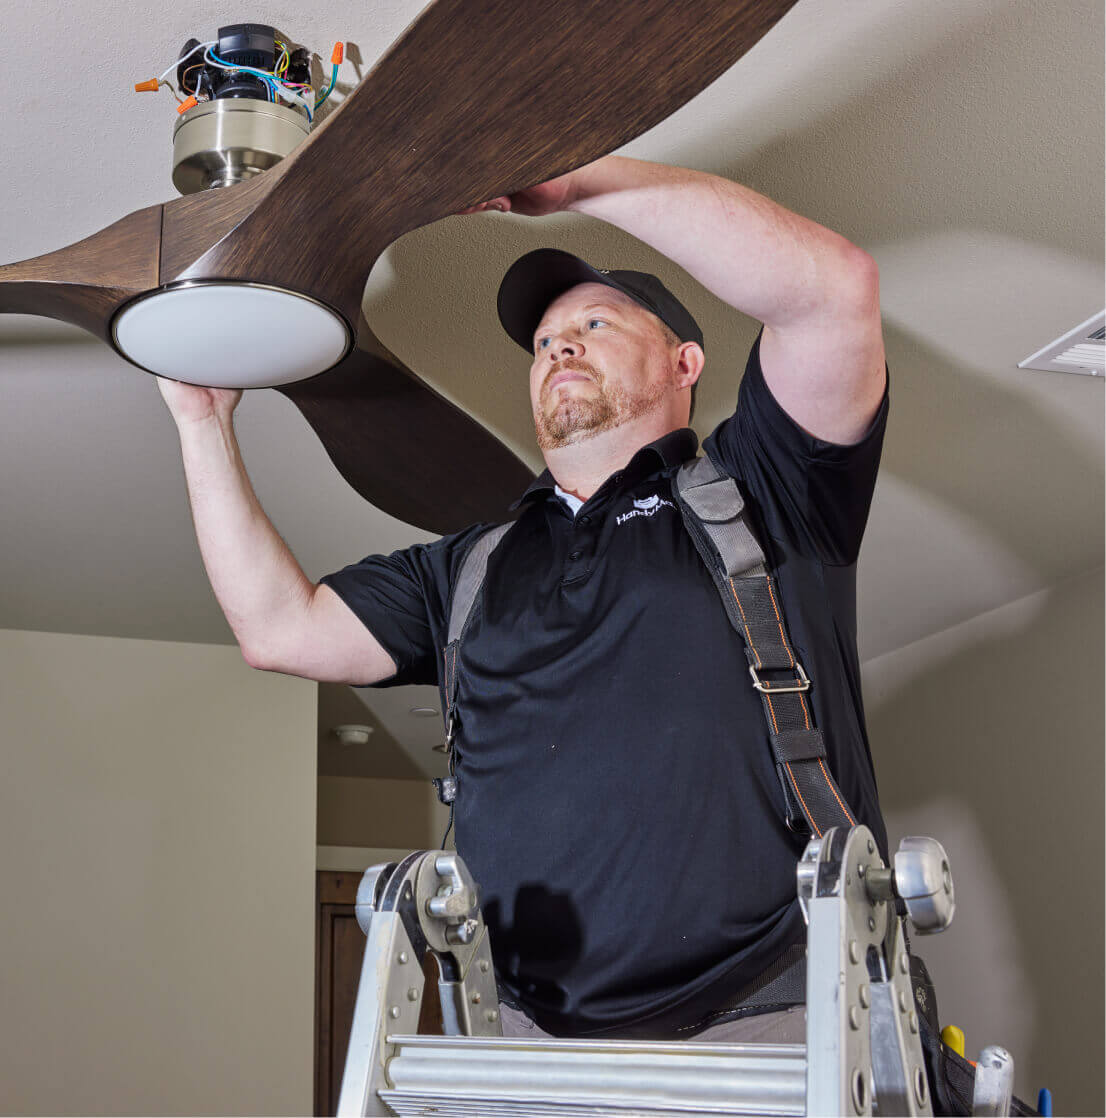 Tailored, easy and affordable insurance for handyman business in Kentucky